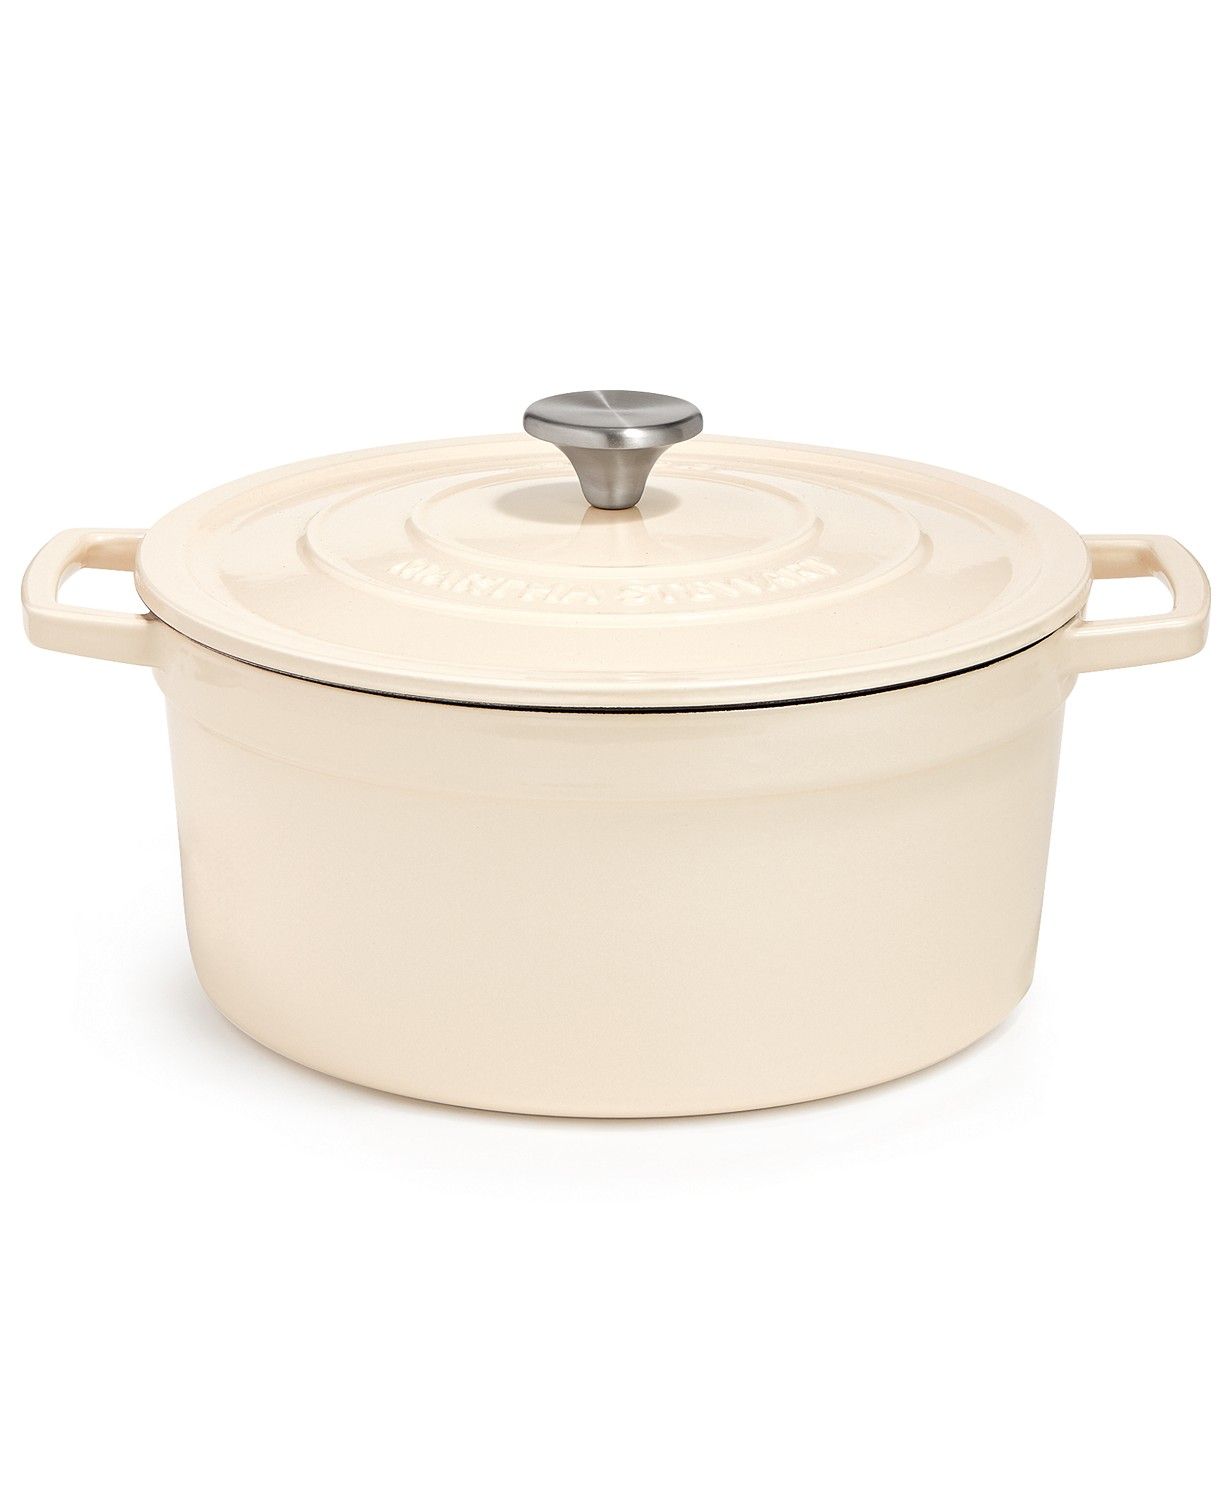 Enameled Cast Iron Round 6-Qt. Dutch Oven, Created for Macy's | Macys (US)